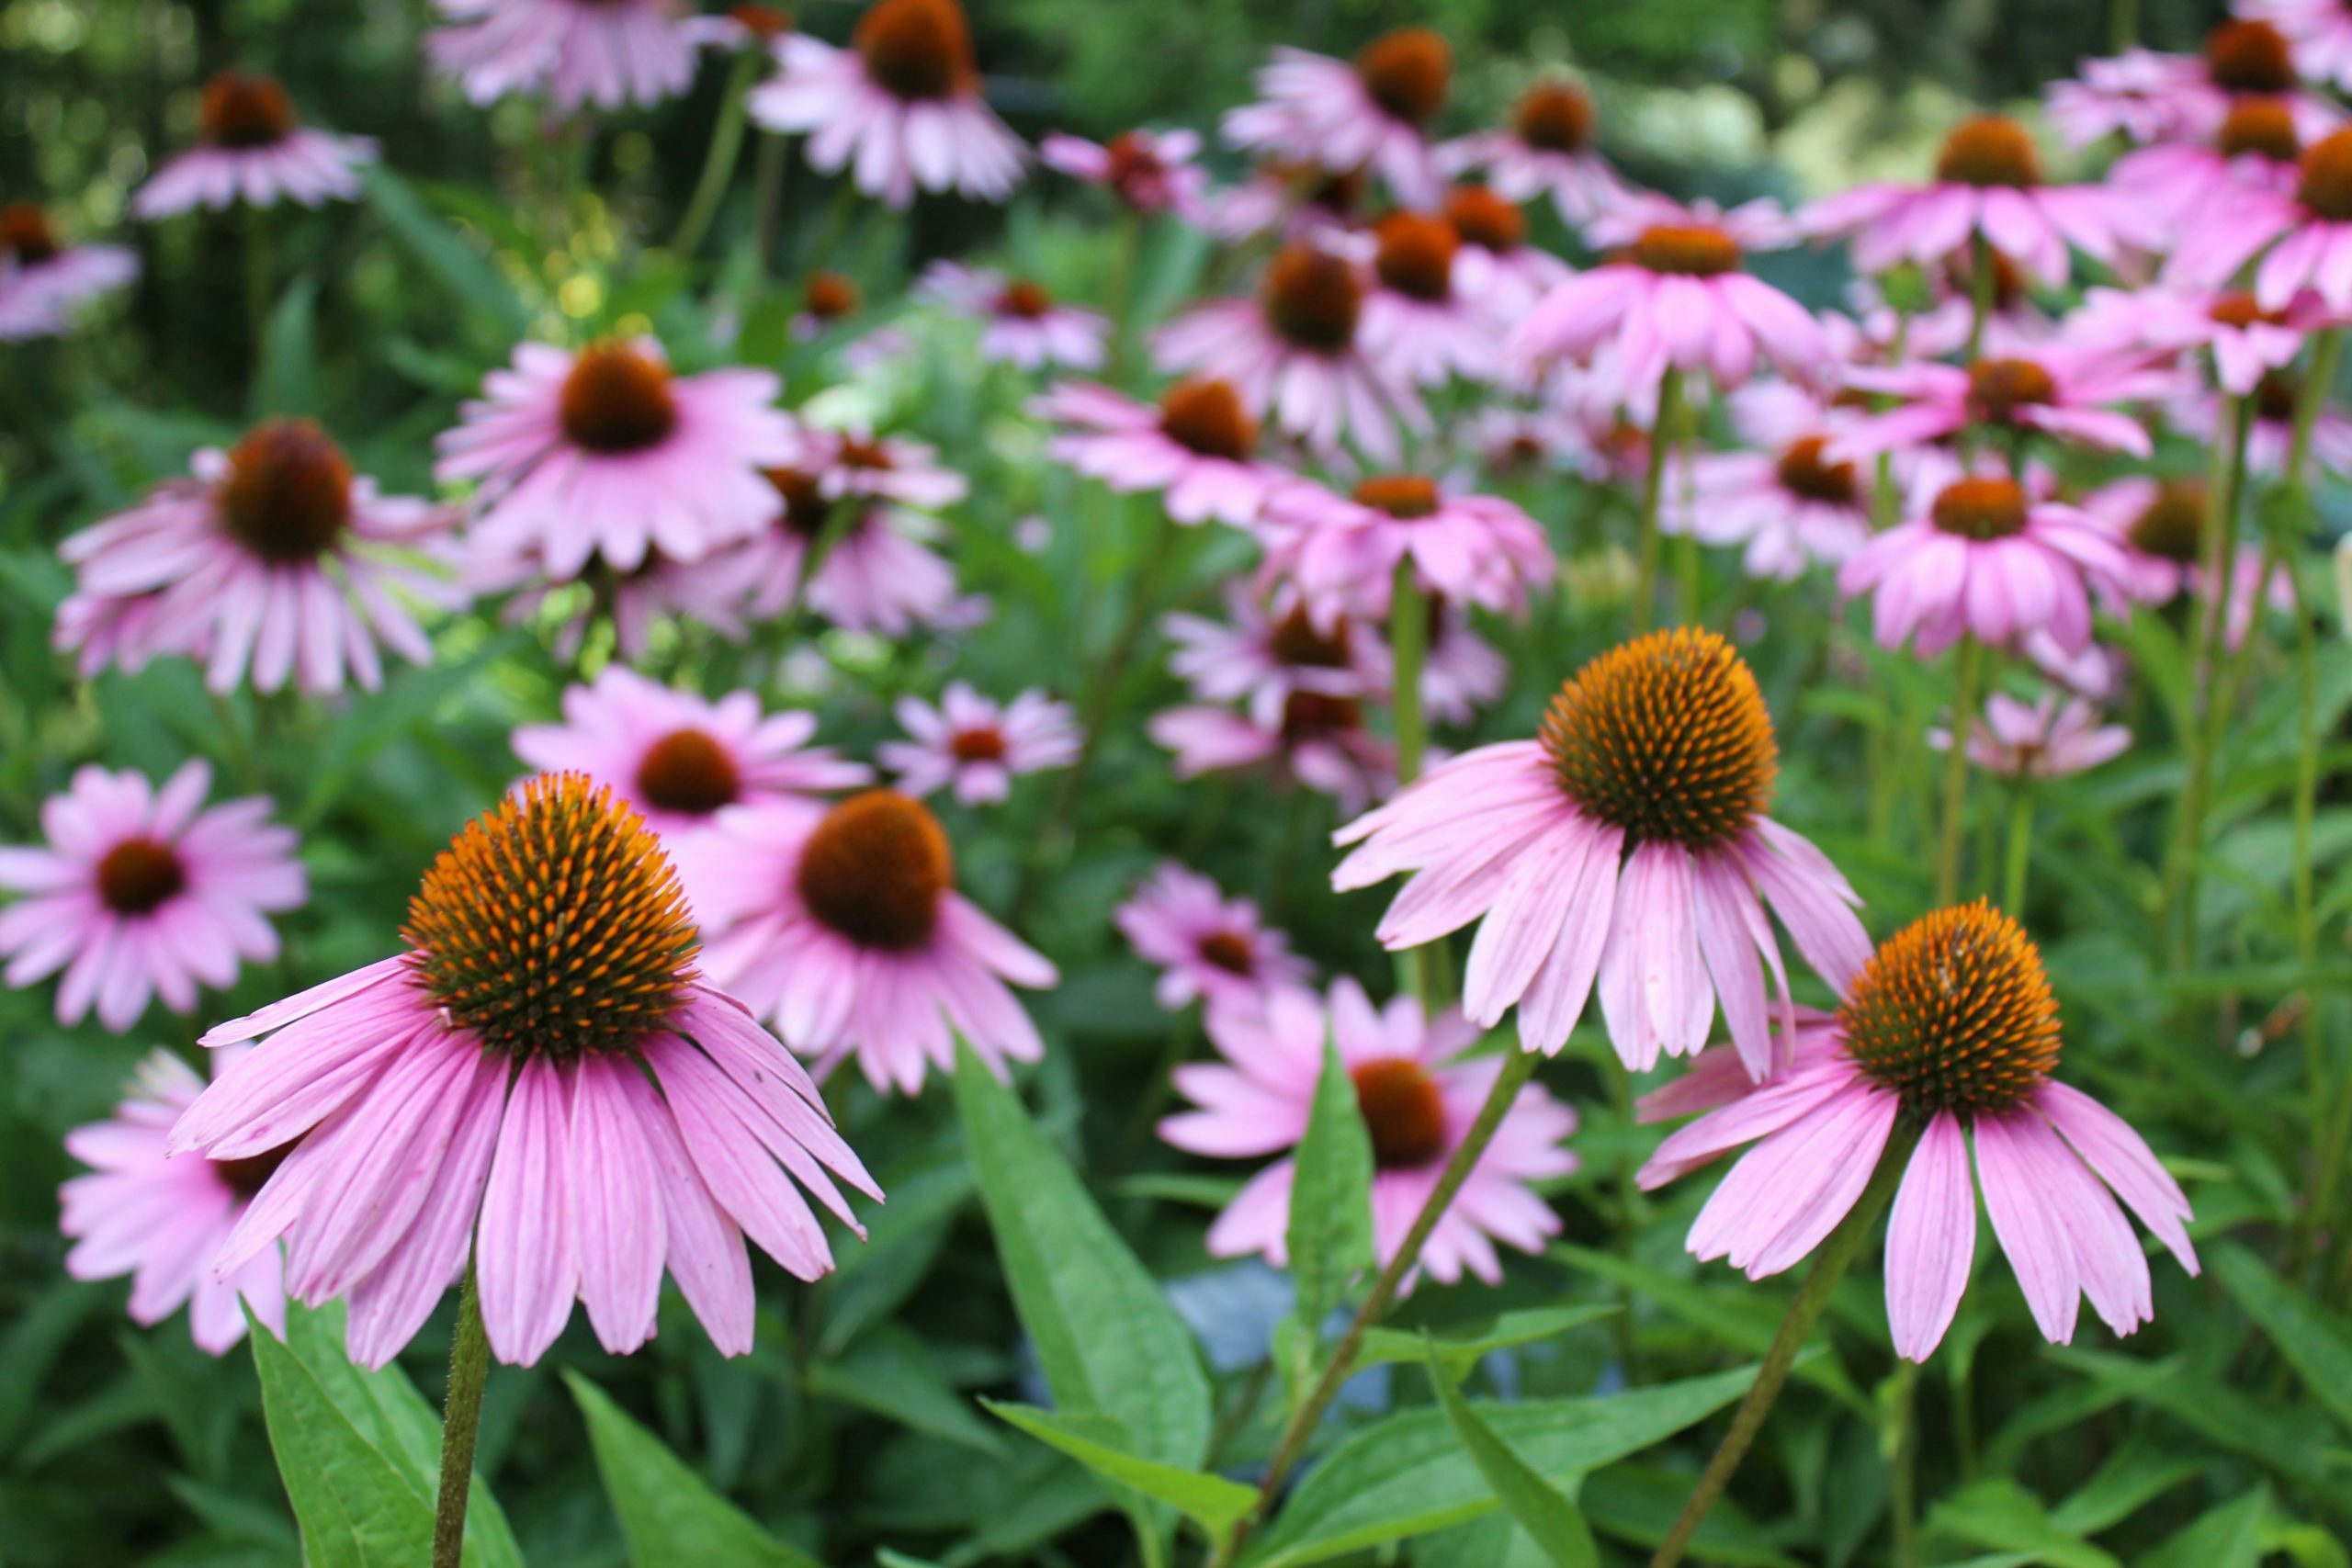 Let's make echinacea extract